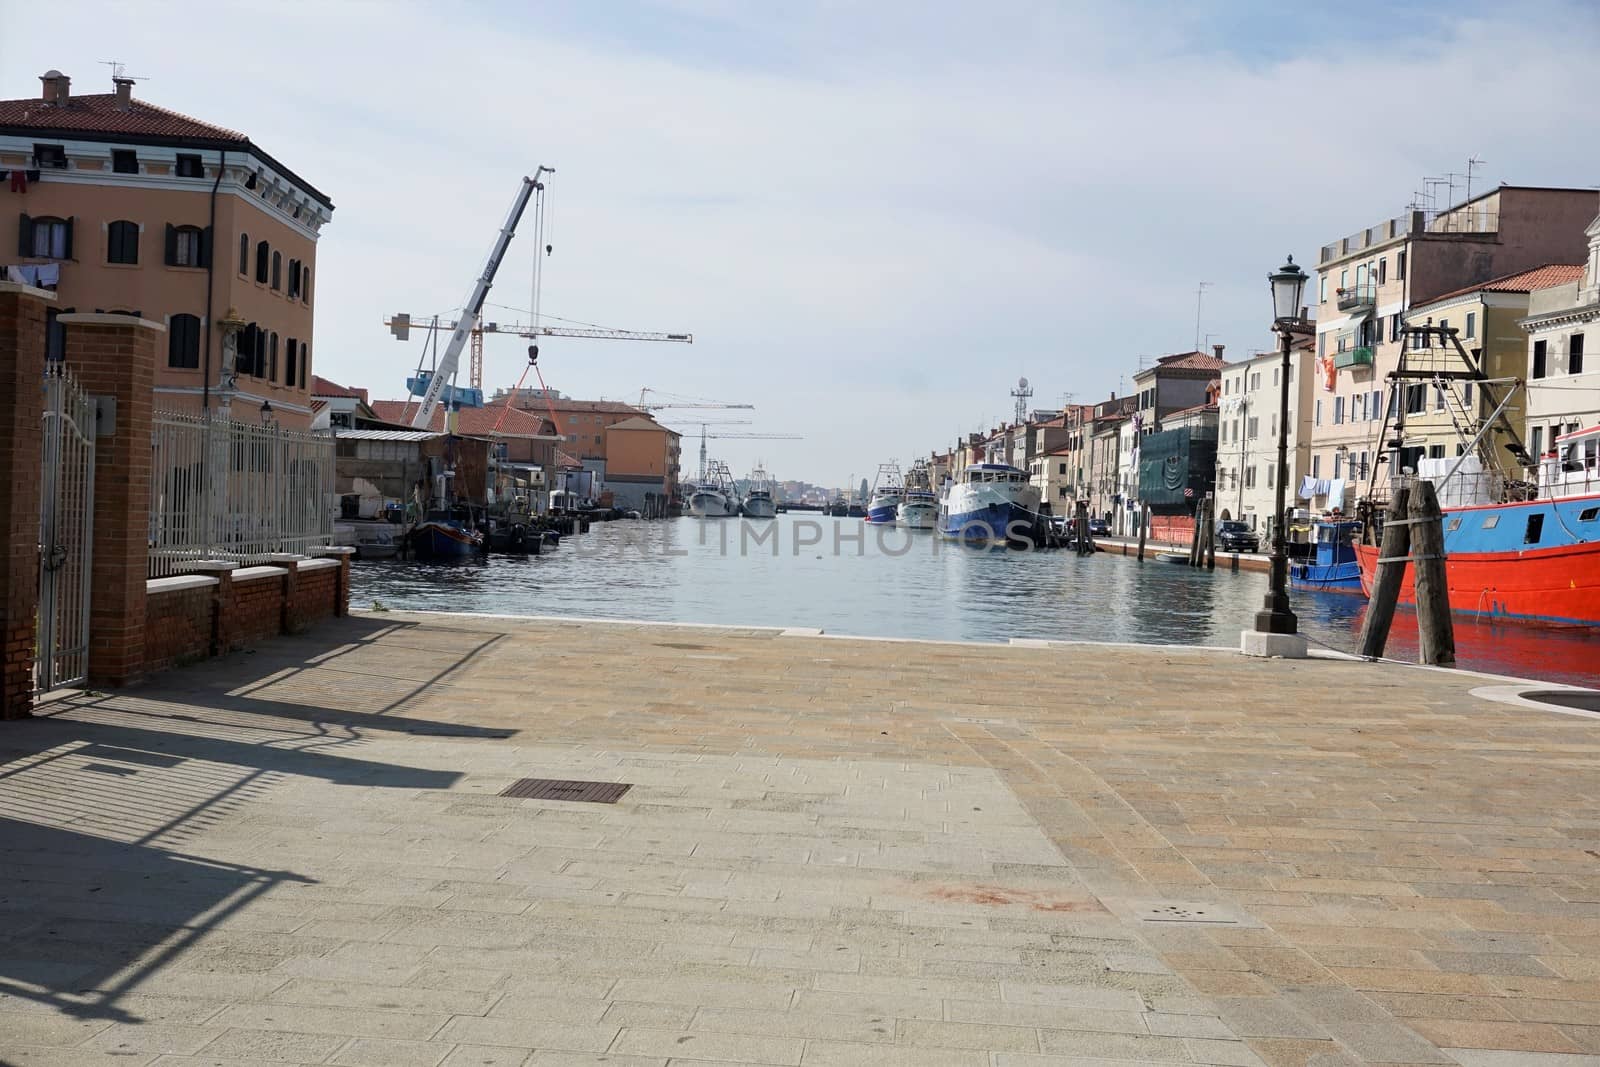 The port of Chioggia with cranes and fisherboats by pisces2386